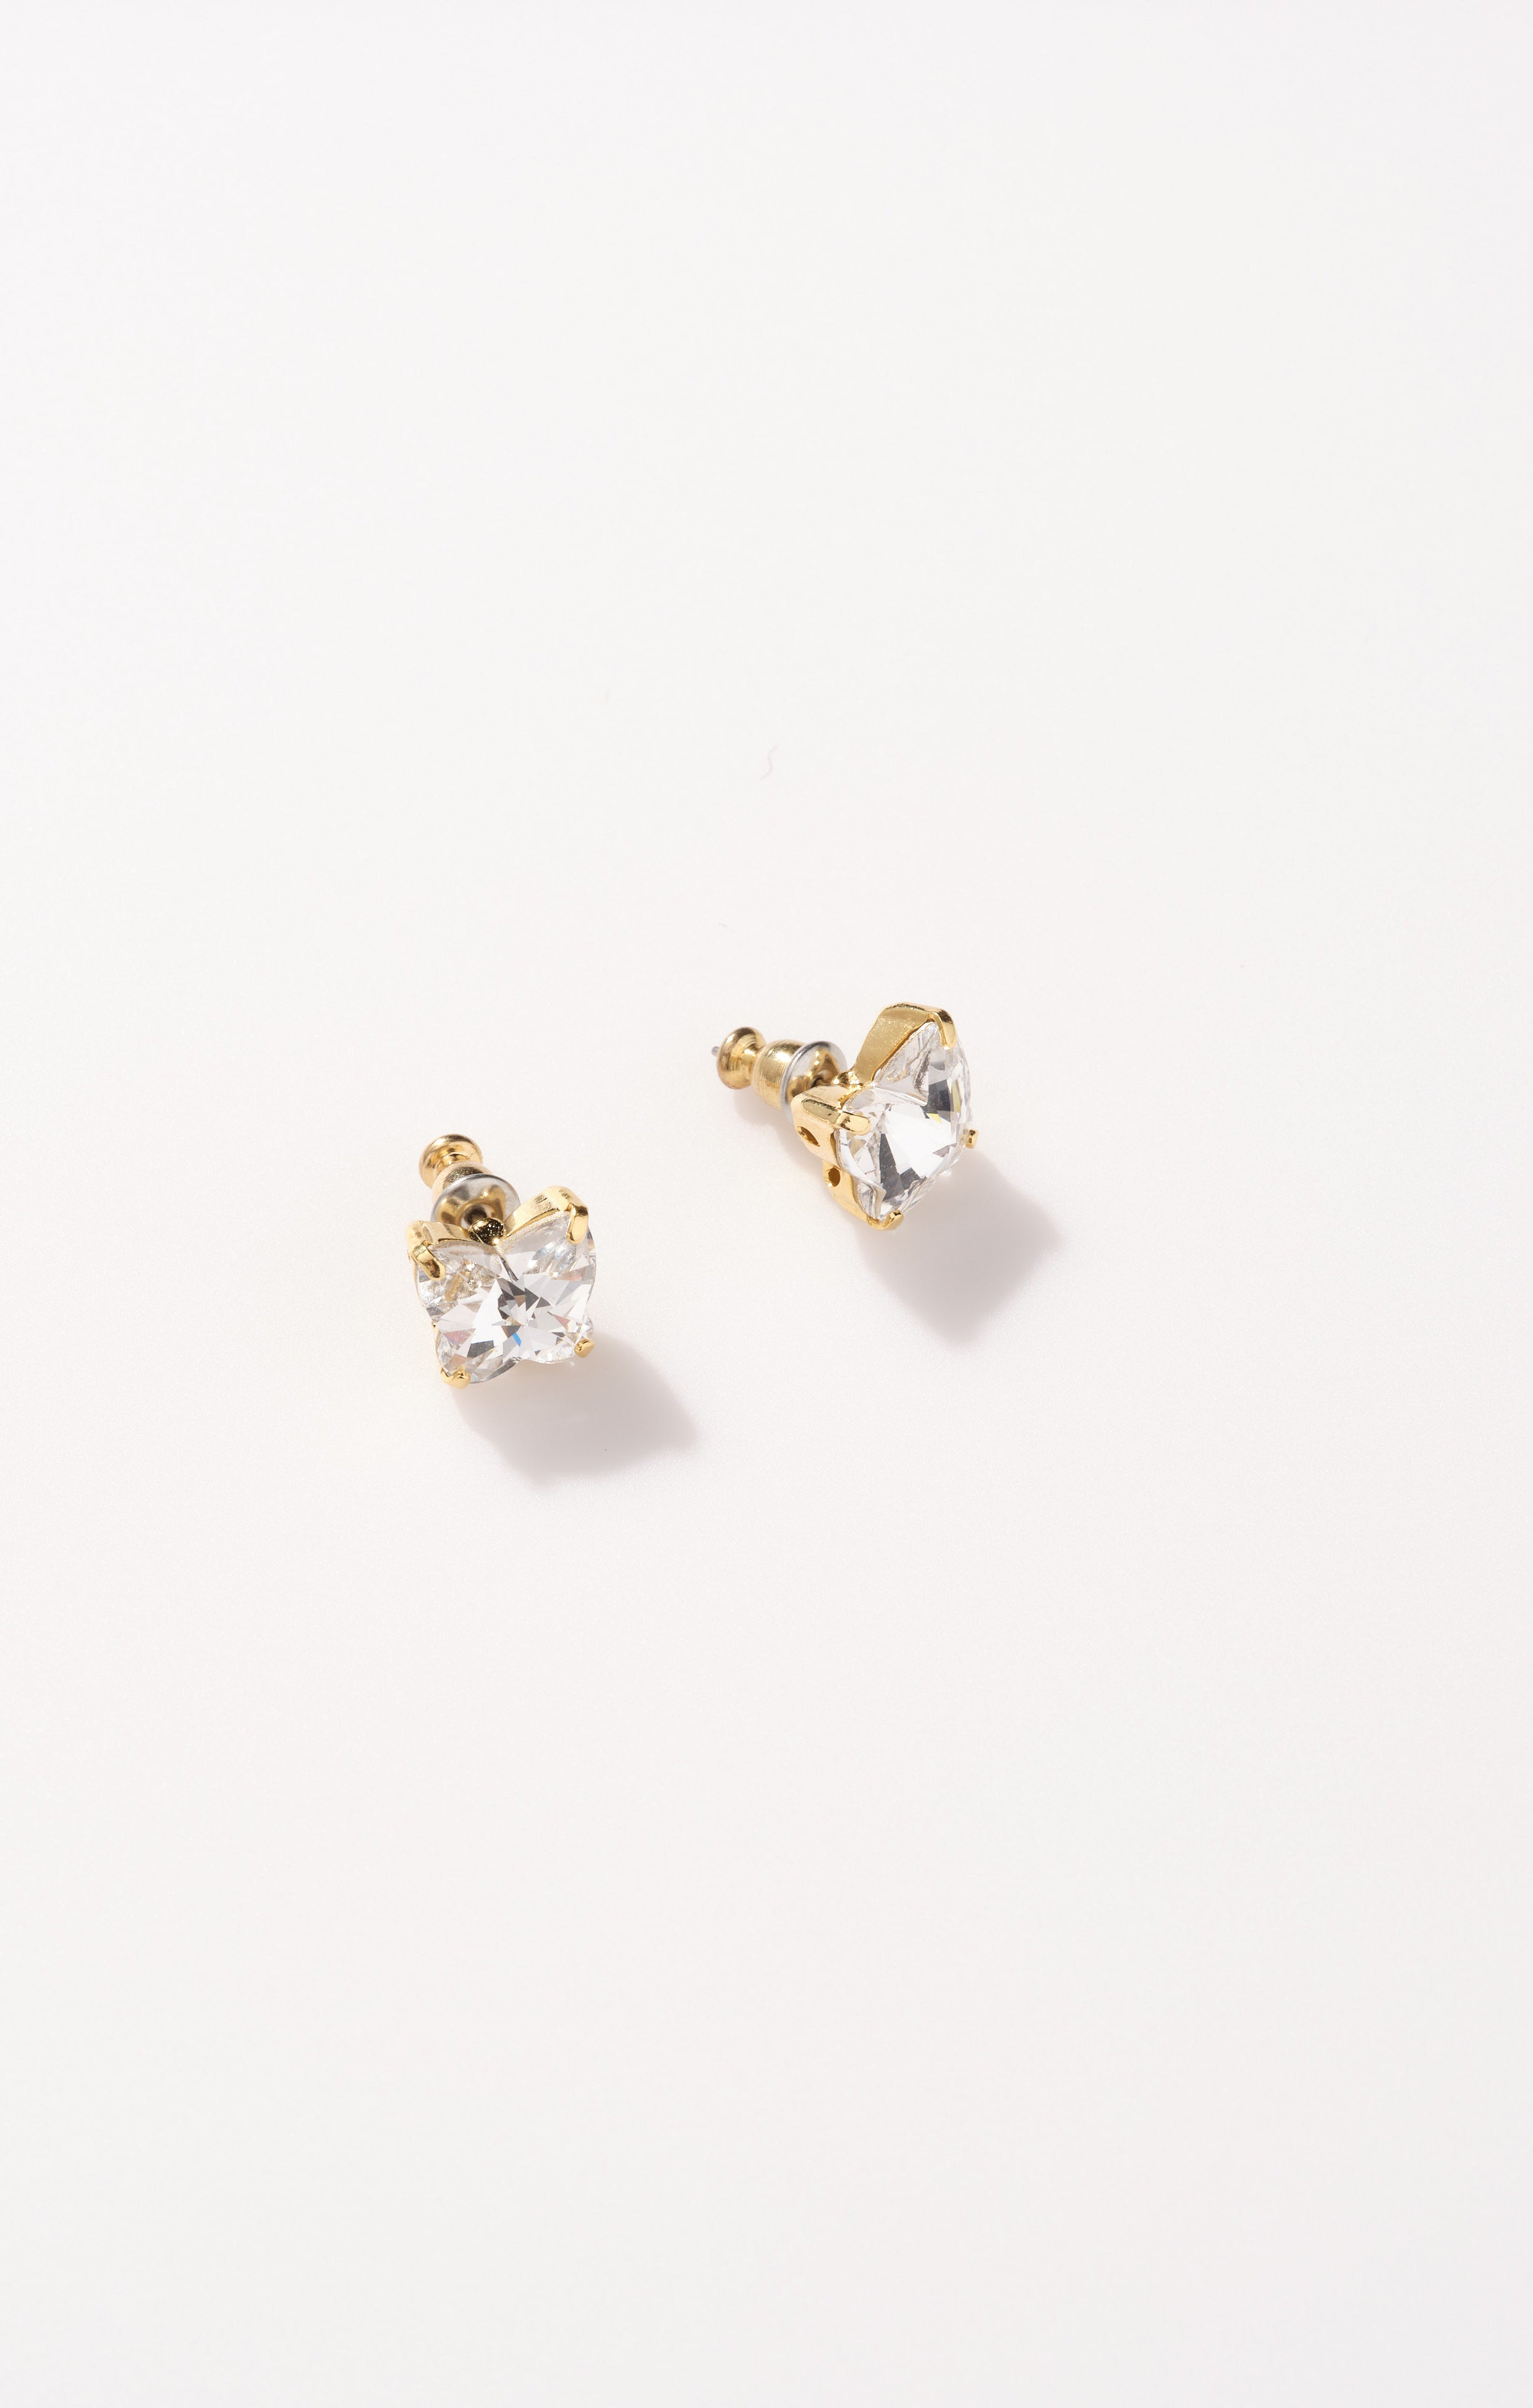 Claire's C LUXE by Claire's 14k Gold 4MM Freshwater Pearl Stud Earrings |  MainPlace Mall